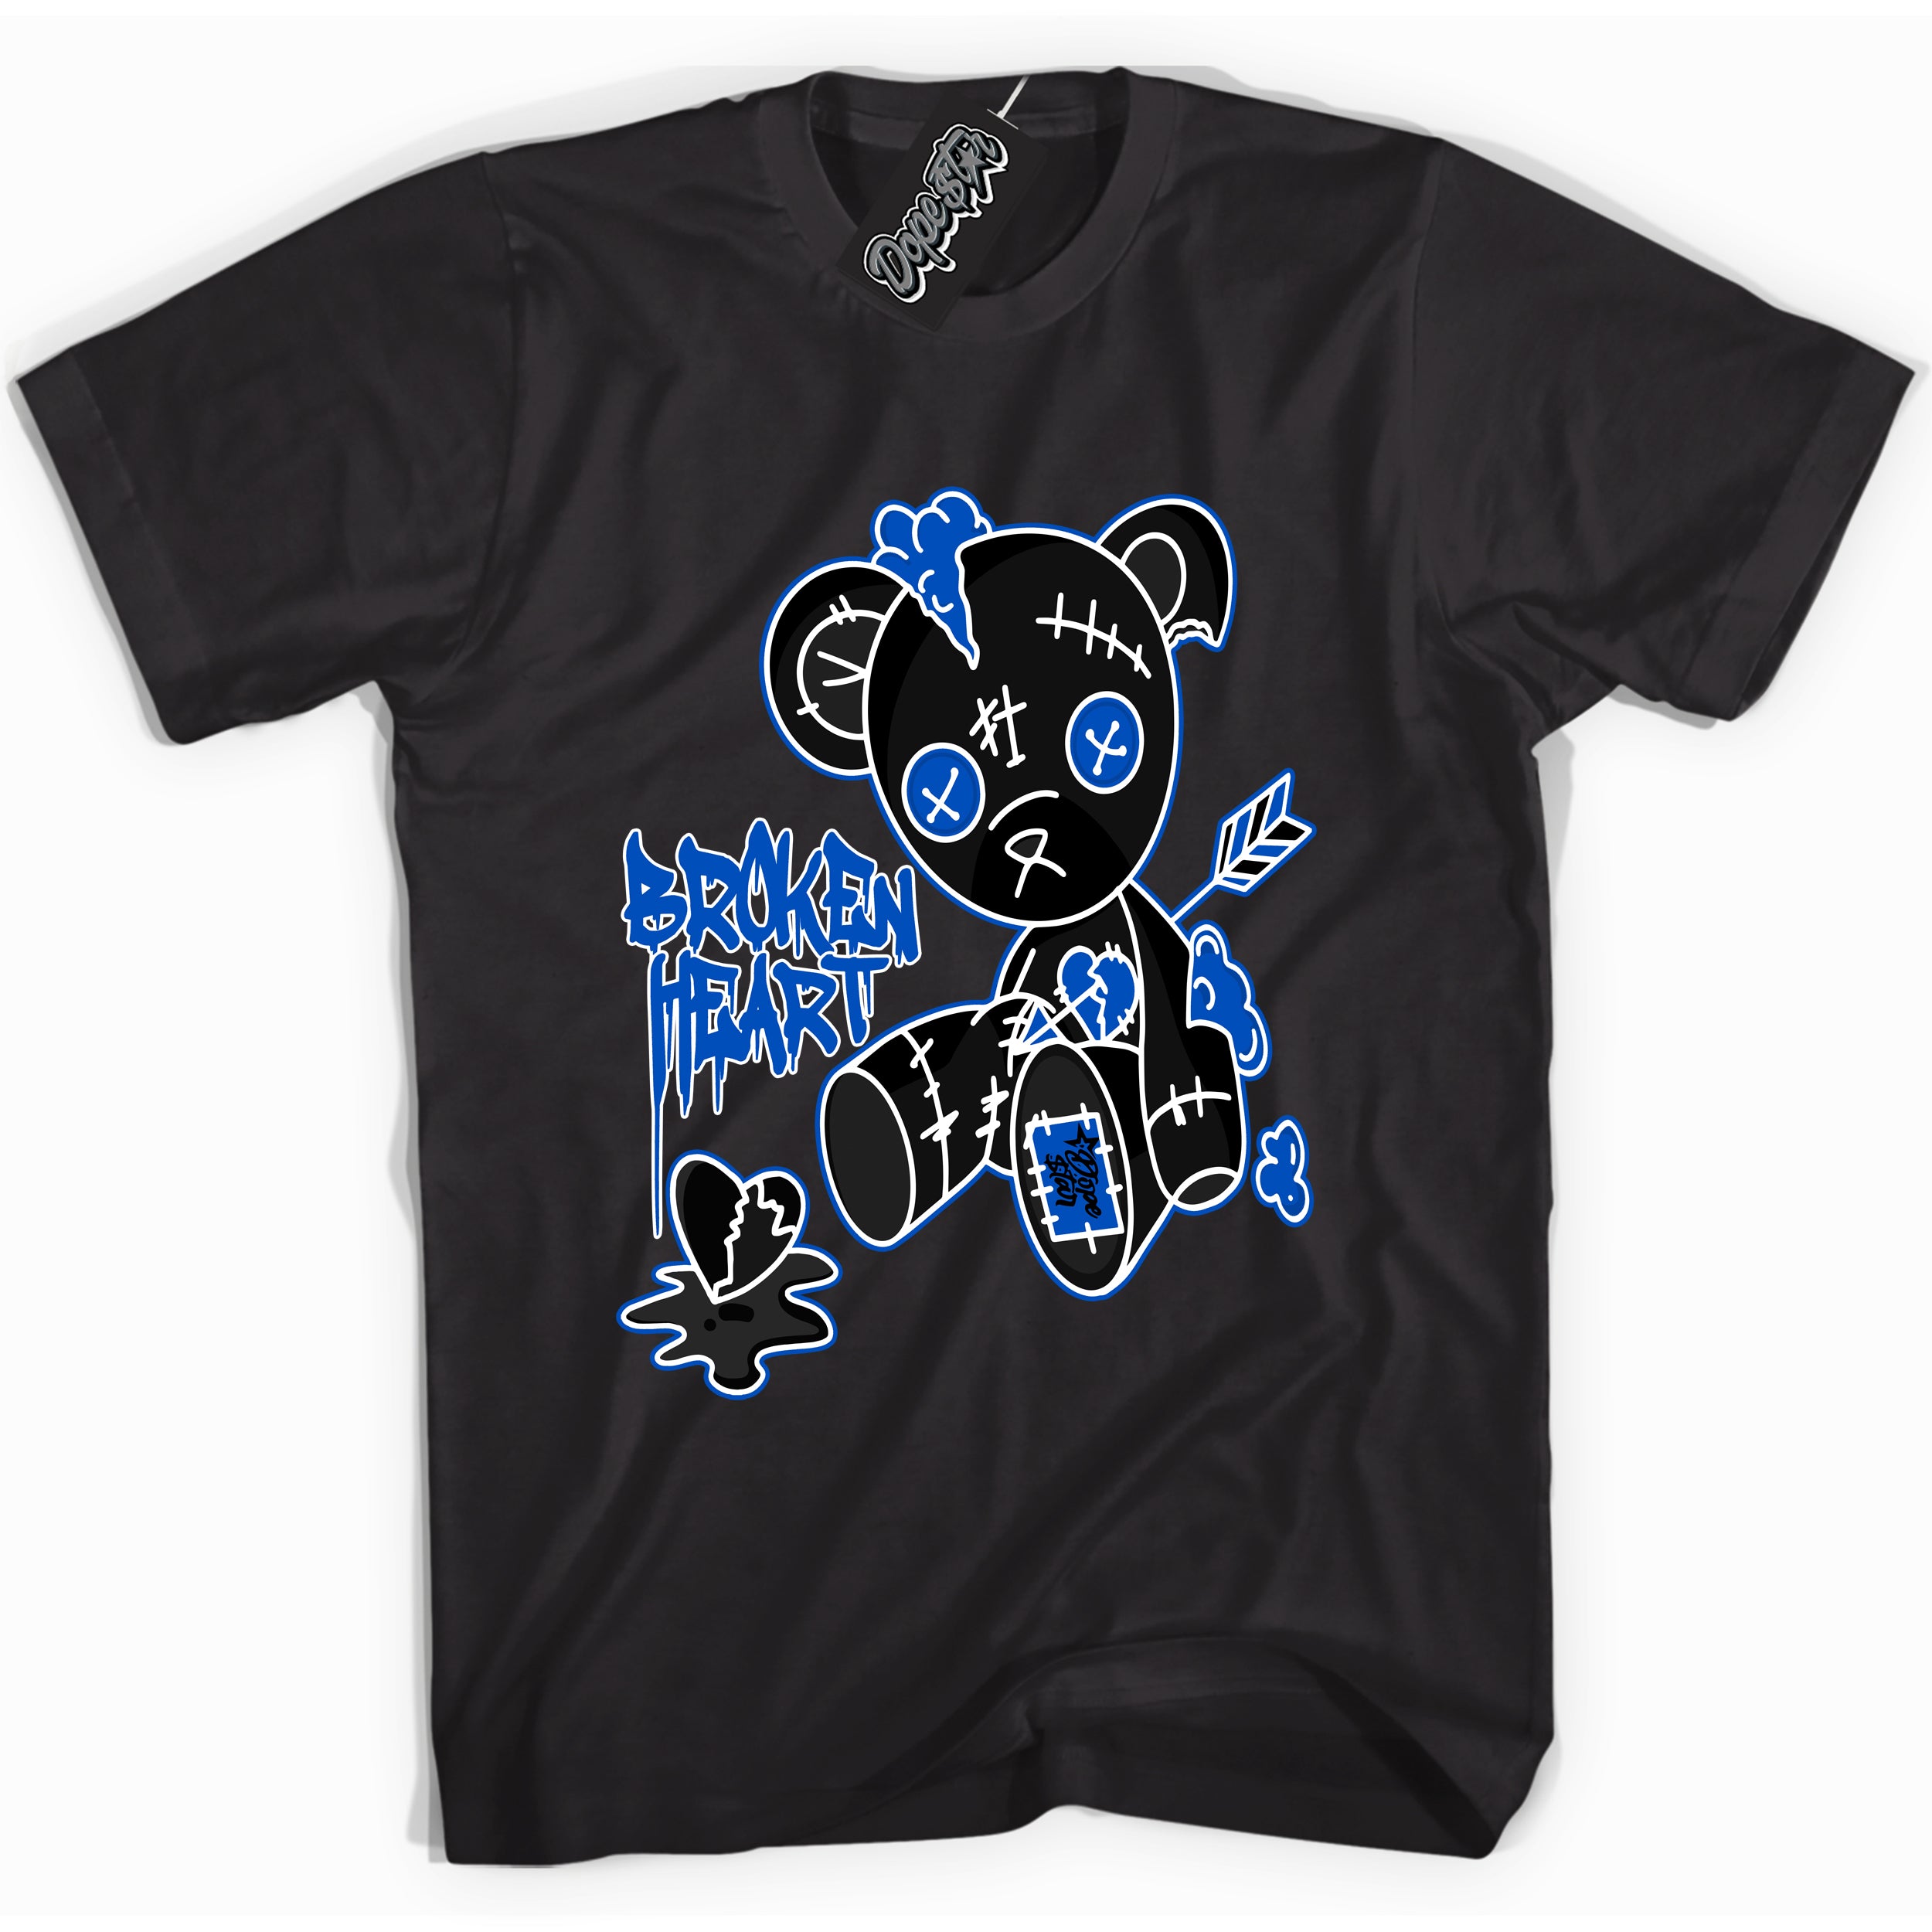 Cool Black graphic tee with Broken Heart Bear print, that perfectly matches OG Royal Reimagined 1s sneakers 